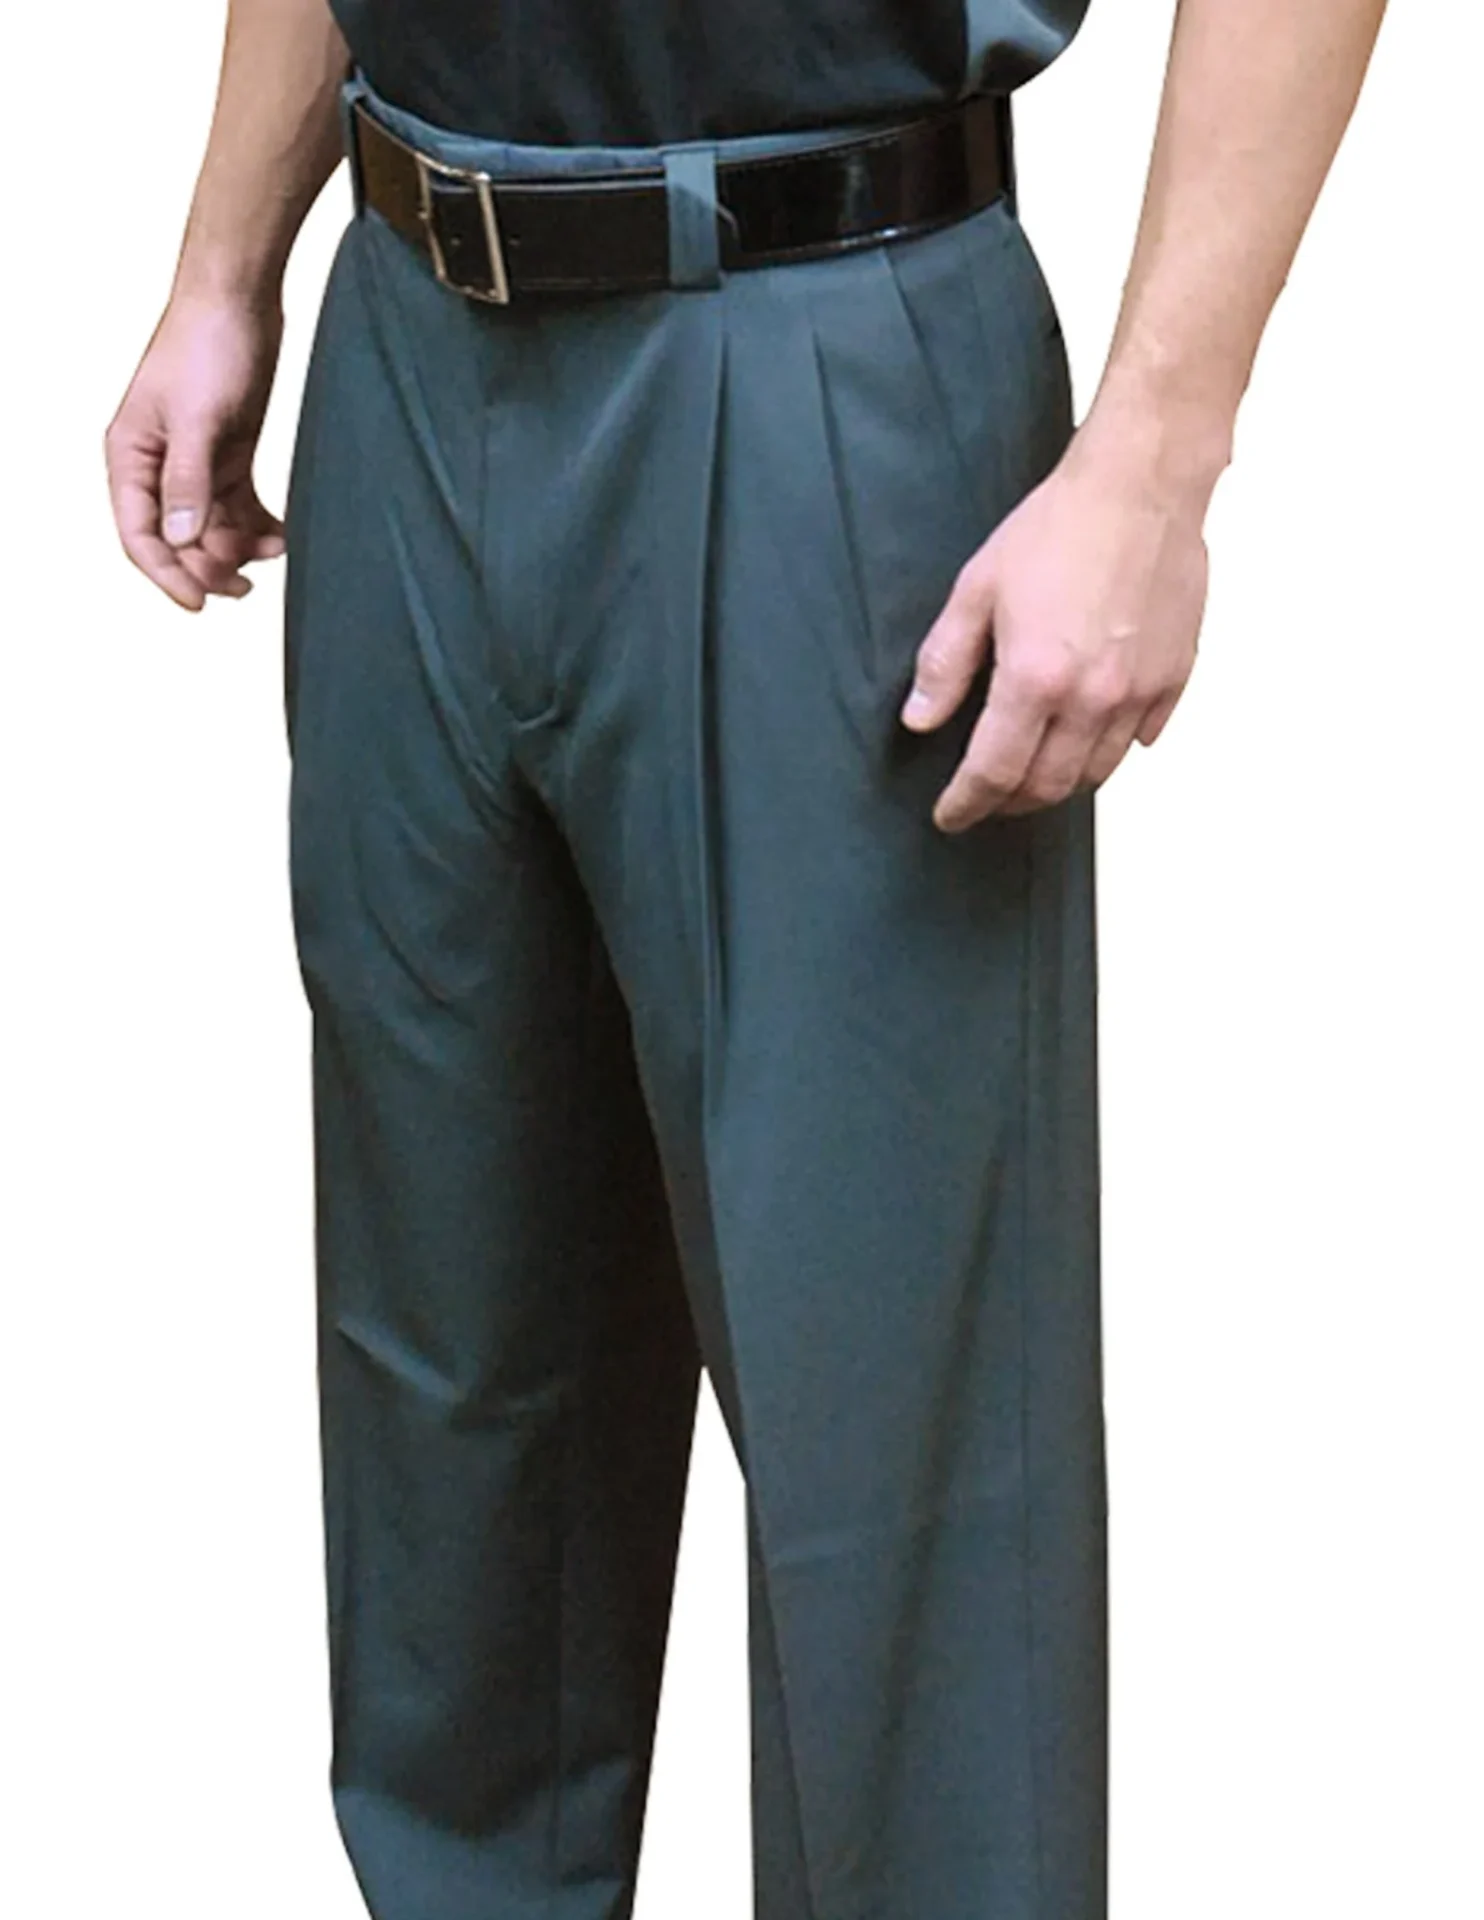 A man wearing green pants and black shoes.